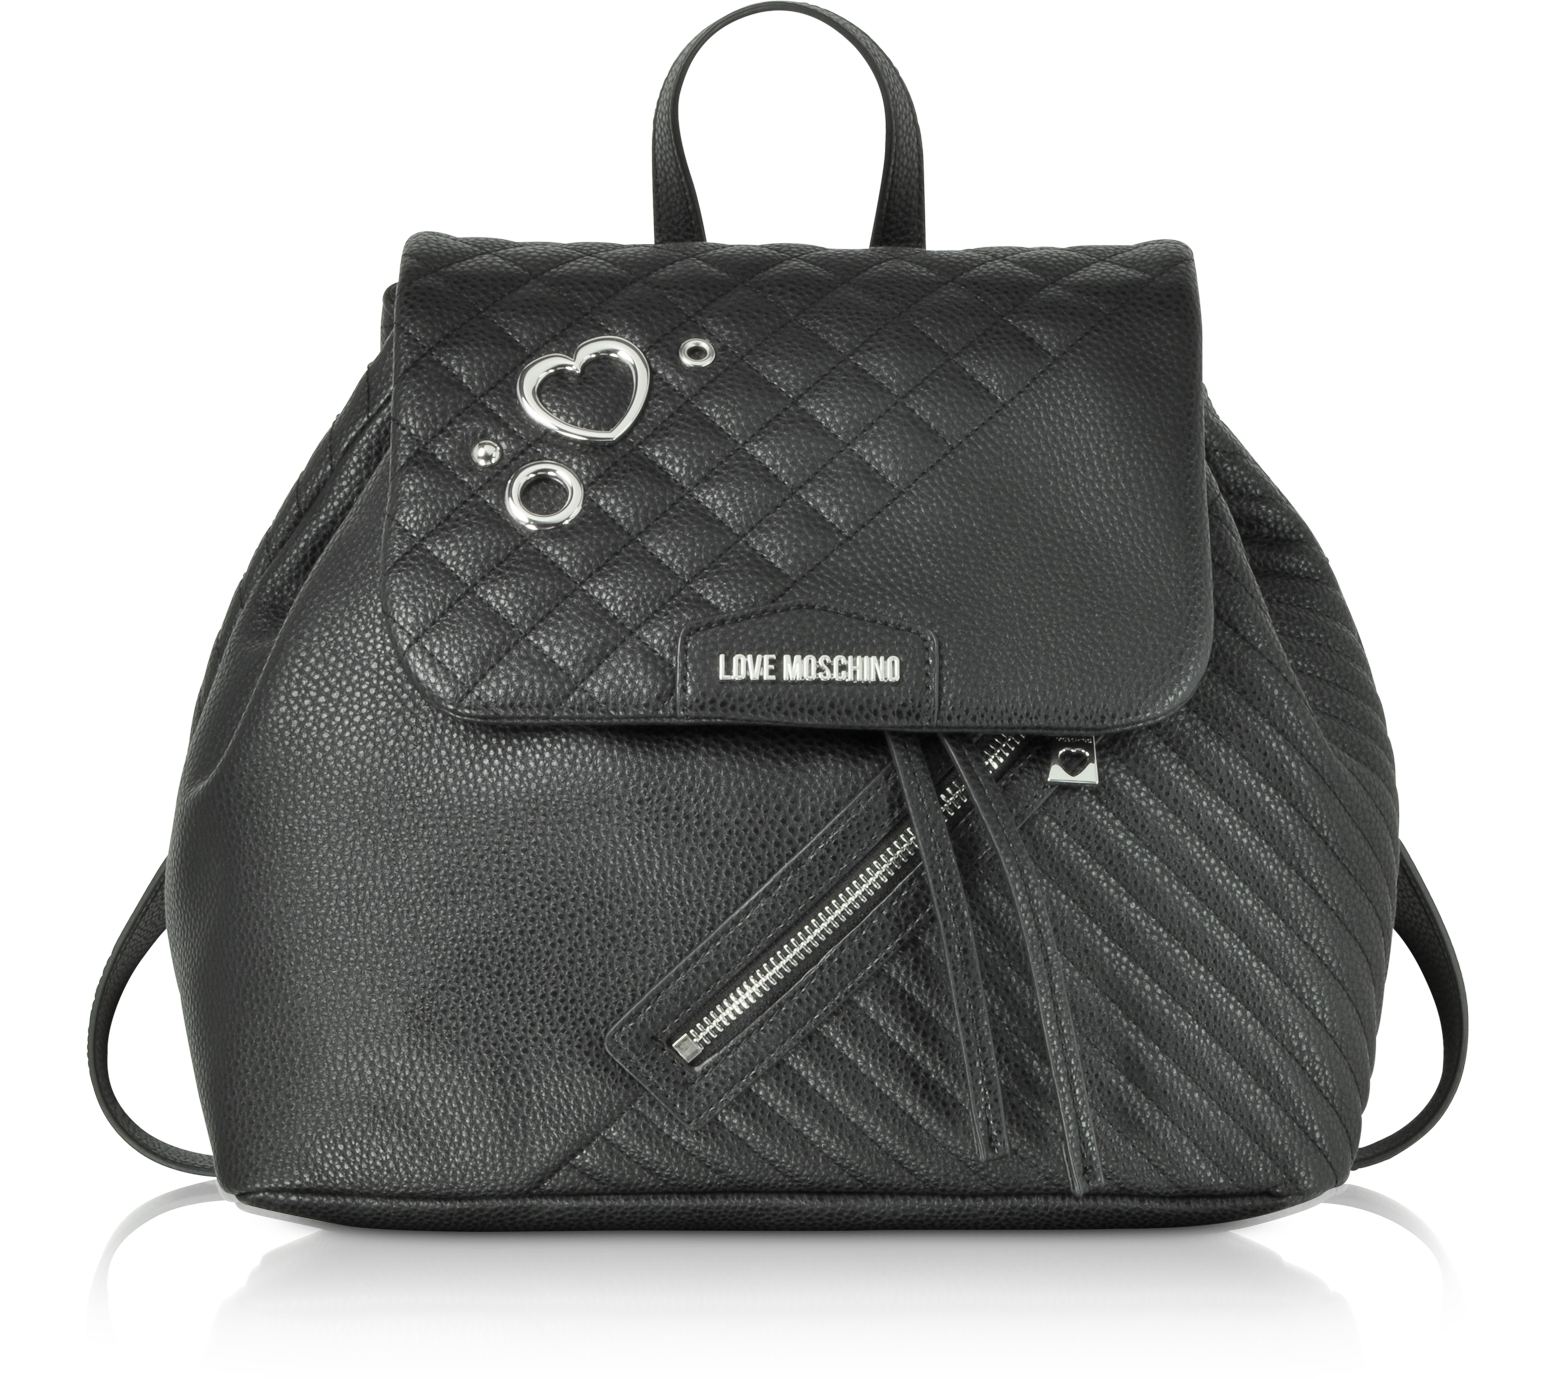 Love Moschino Black Quilted Eco Leather Backpack at FORZIERI